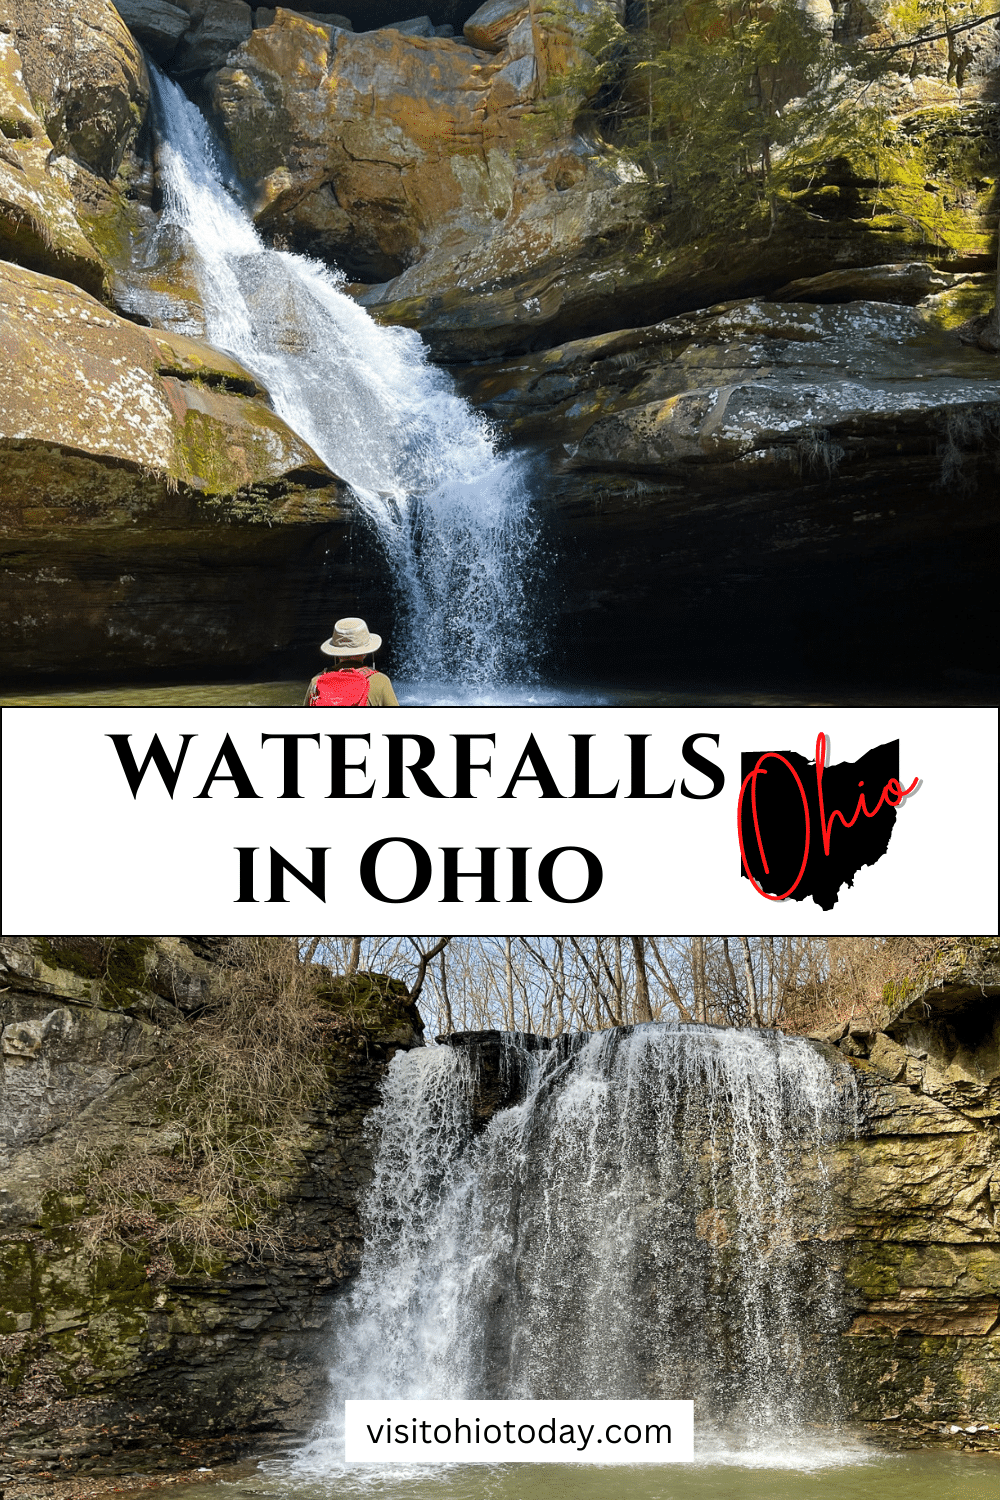 Ohio is known for its wonderful natural beauty and one thing that Ohio has a lot of, is waterfalls. Here are some of my favorite waterfalls in Ohio that I think you will enjoy. Some of the waterfalls are gentle and some are a bit more lively. Hiking and picnicking can also be done at some of these waterfalls. | Waterfalls In Ohio | Ohio Adventures | Visit Ohio Today